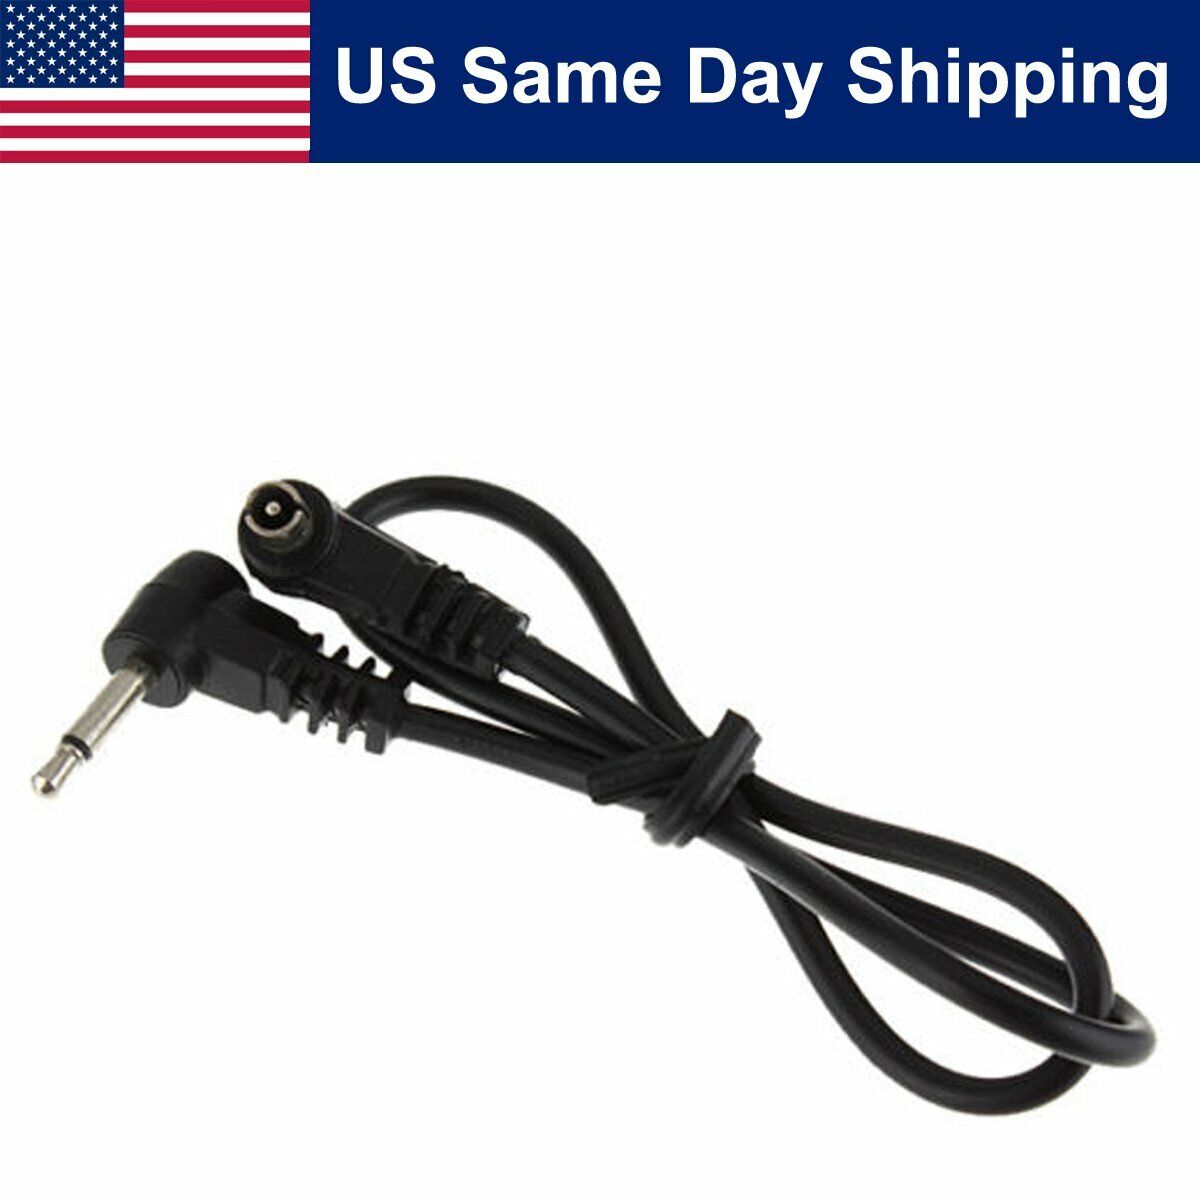 3.5mm Plug to Male Flash PC Sync Cord Cable 12" 12 inch for Studio Photography Unbranded Does not apply